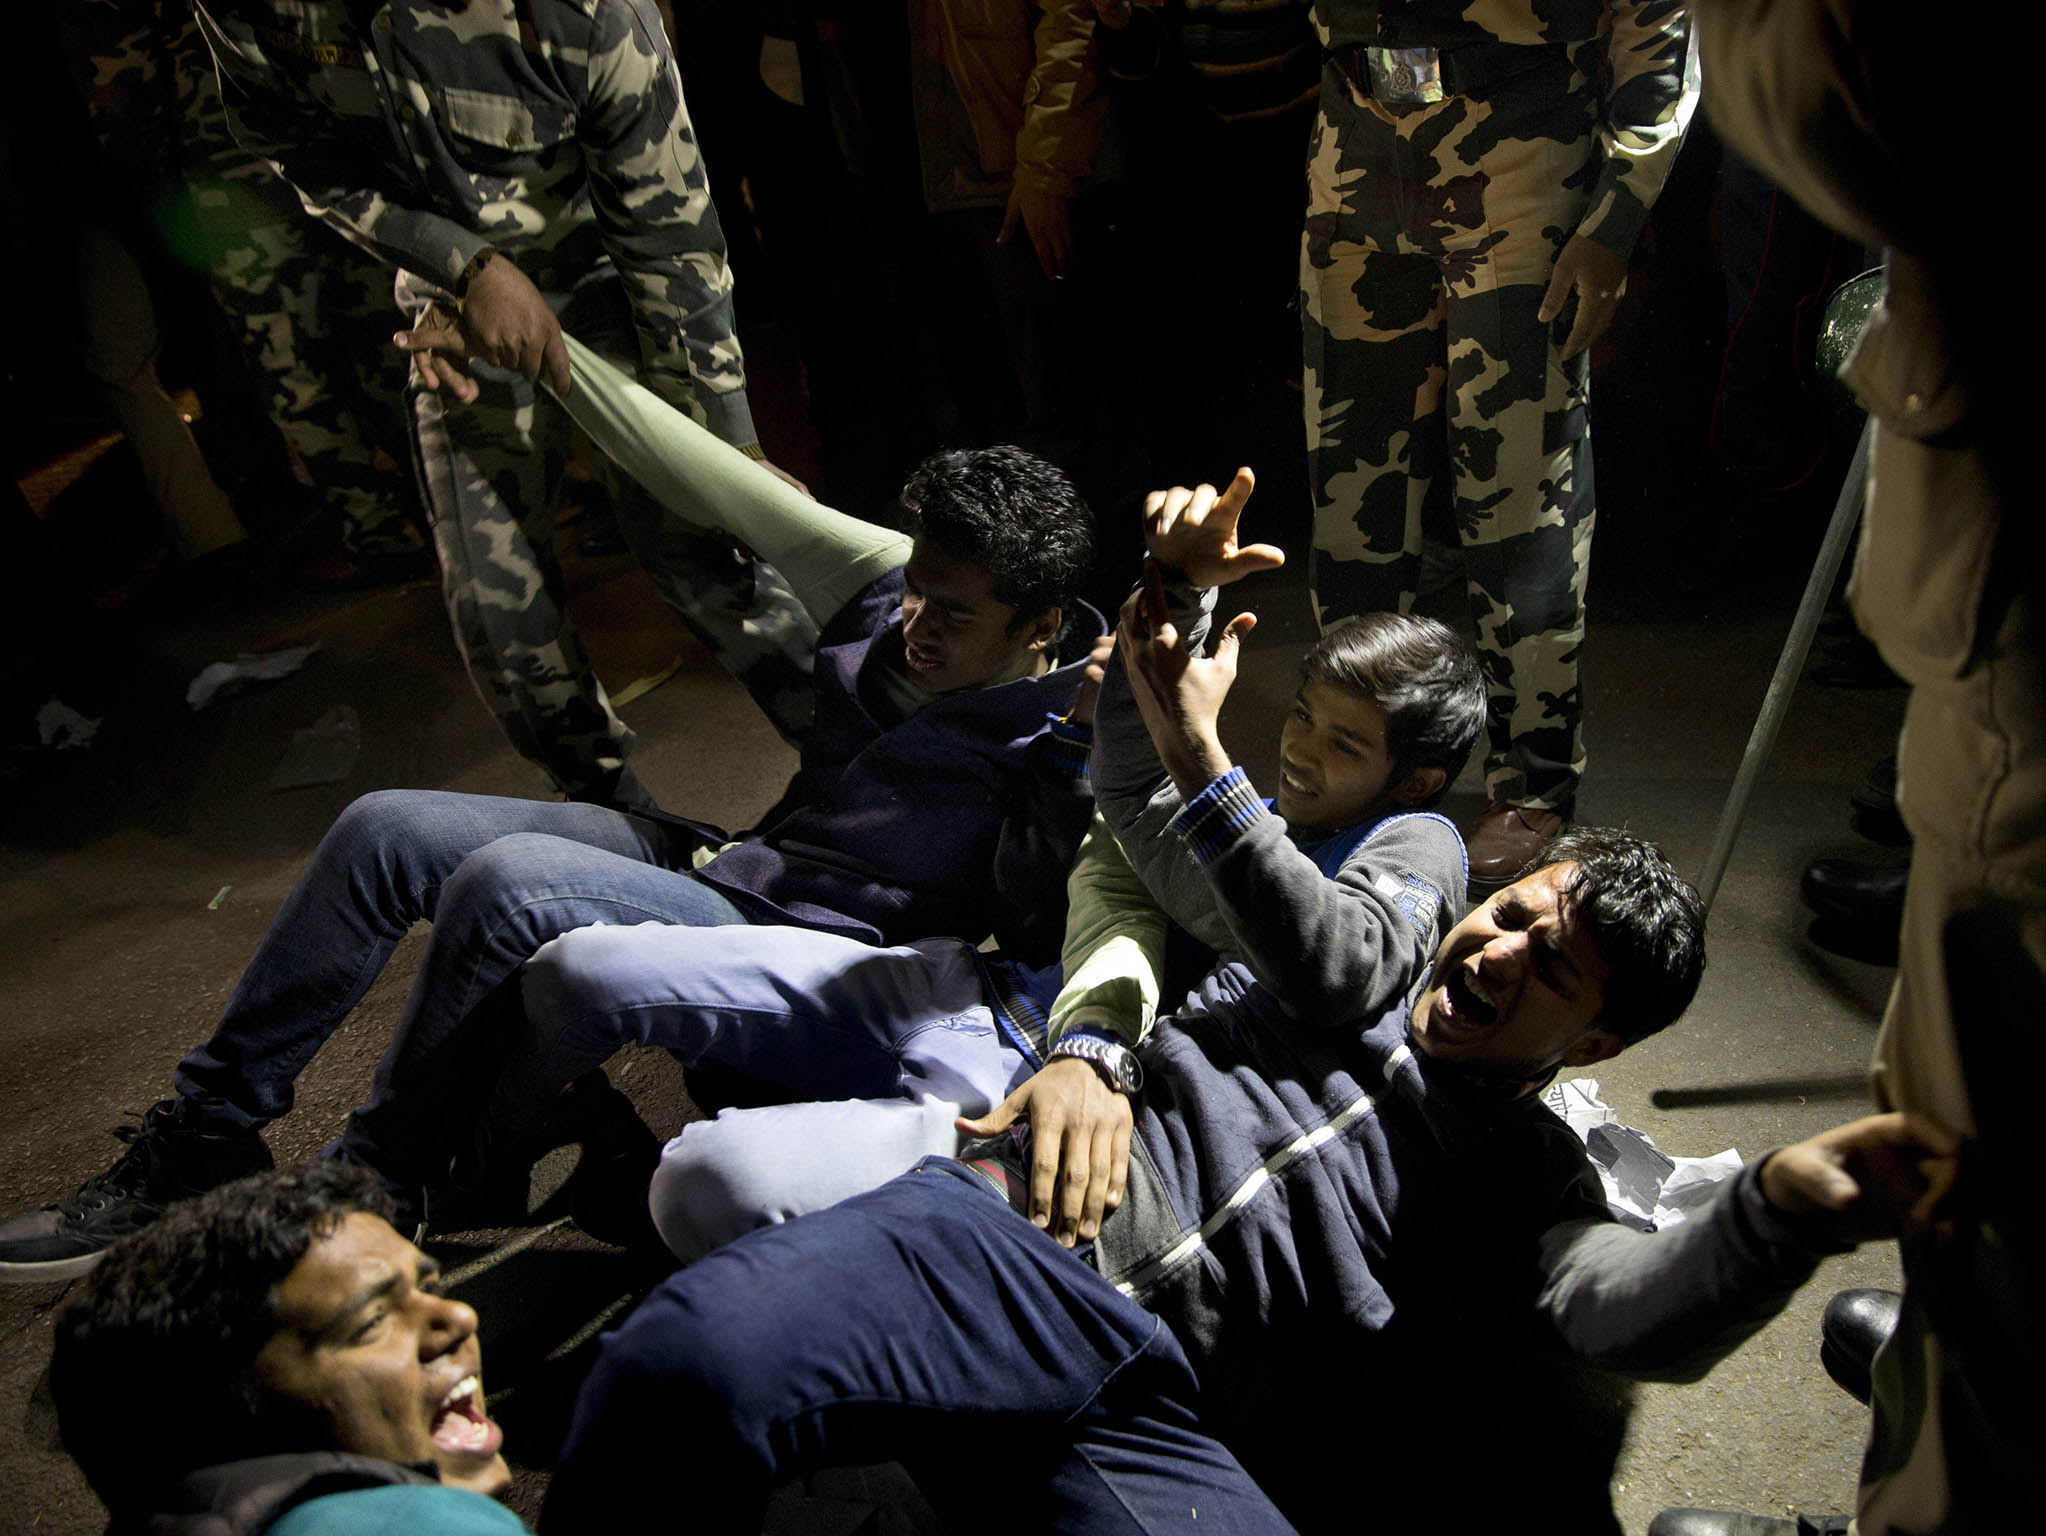 Indian youth shout slogans as they are detained by police during a protest against the release of a juvenile convicted in the fatal 2012 gang rape